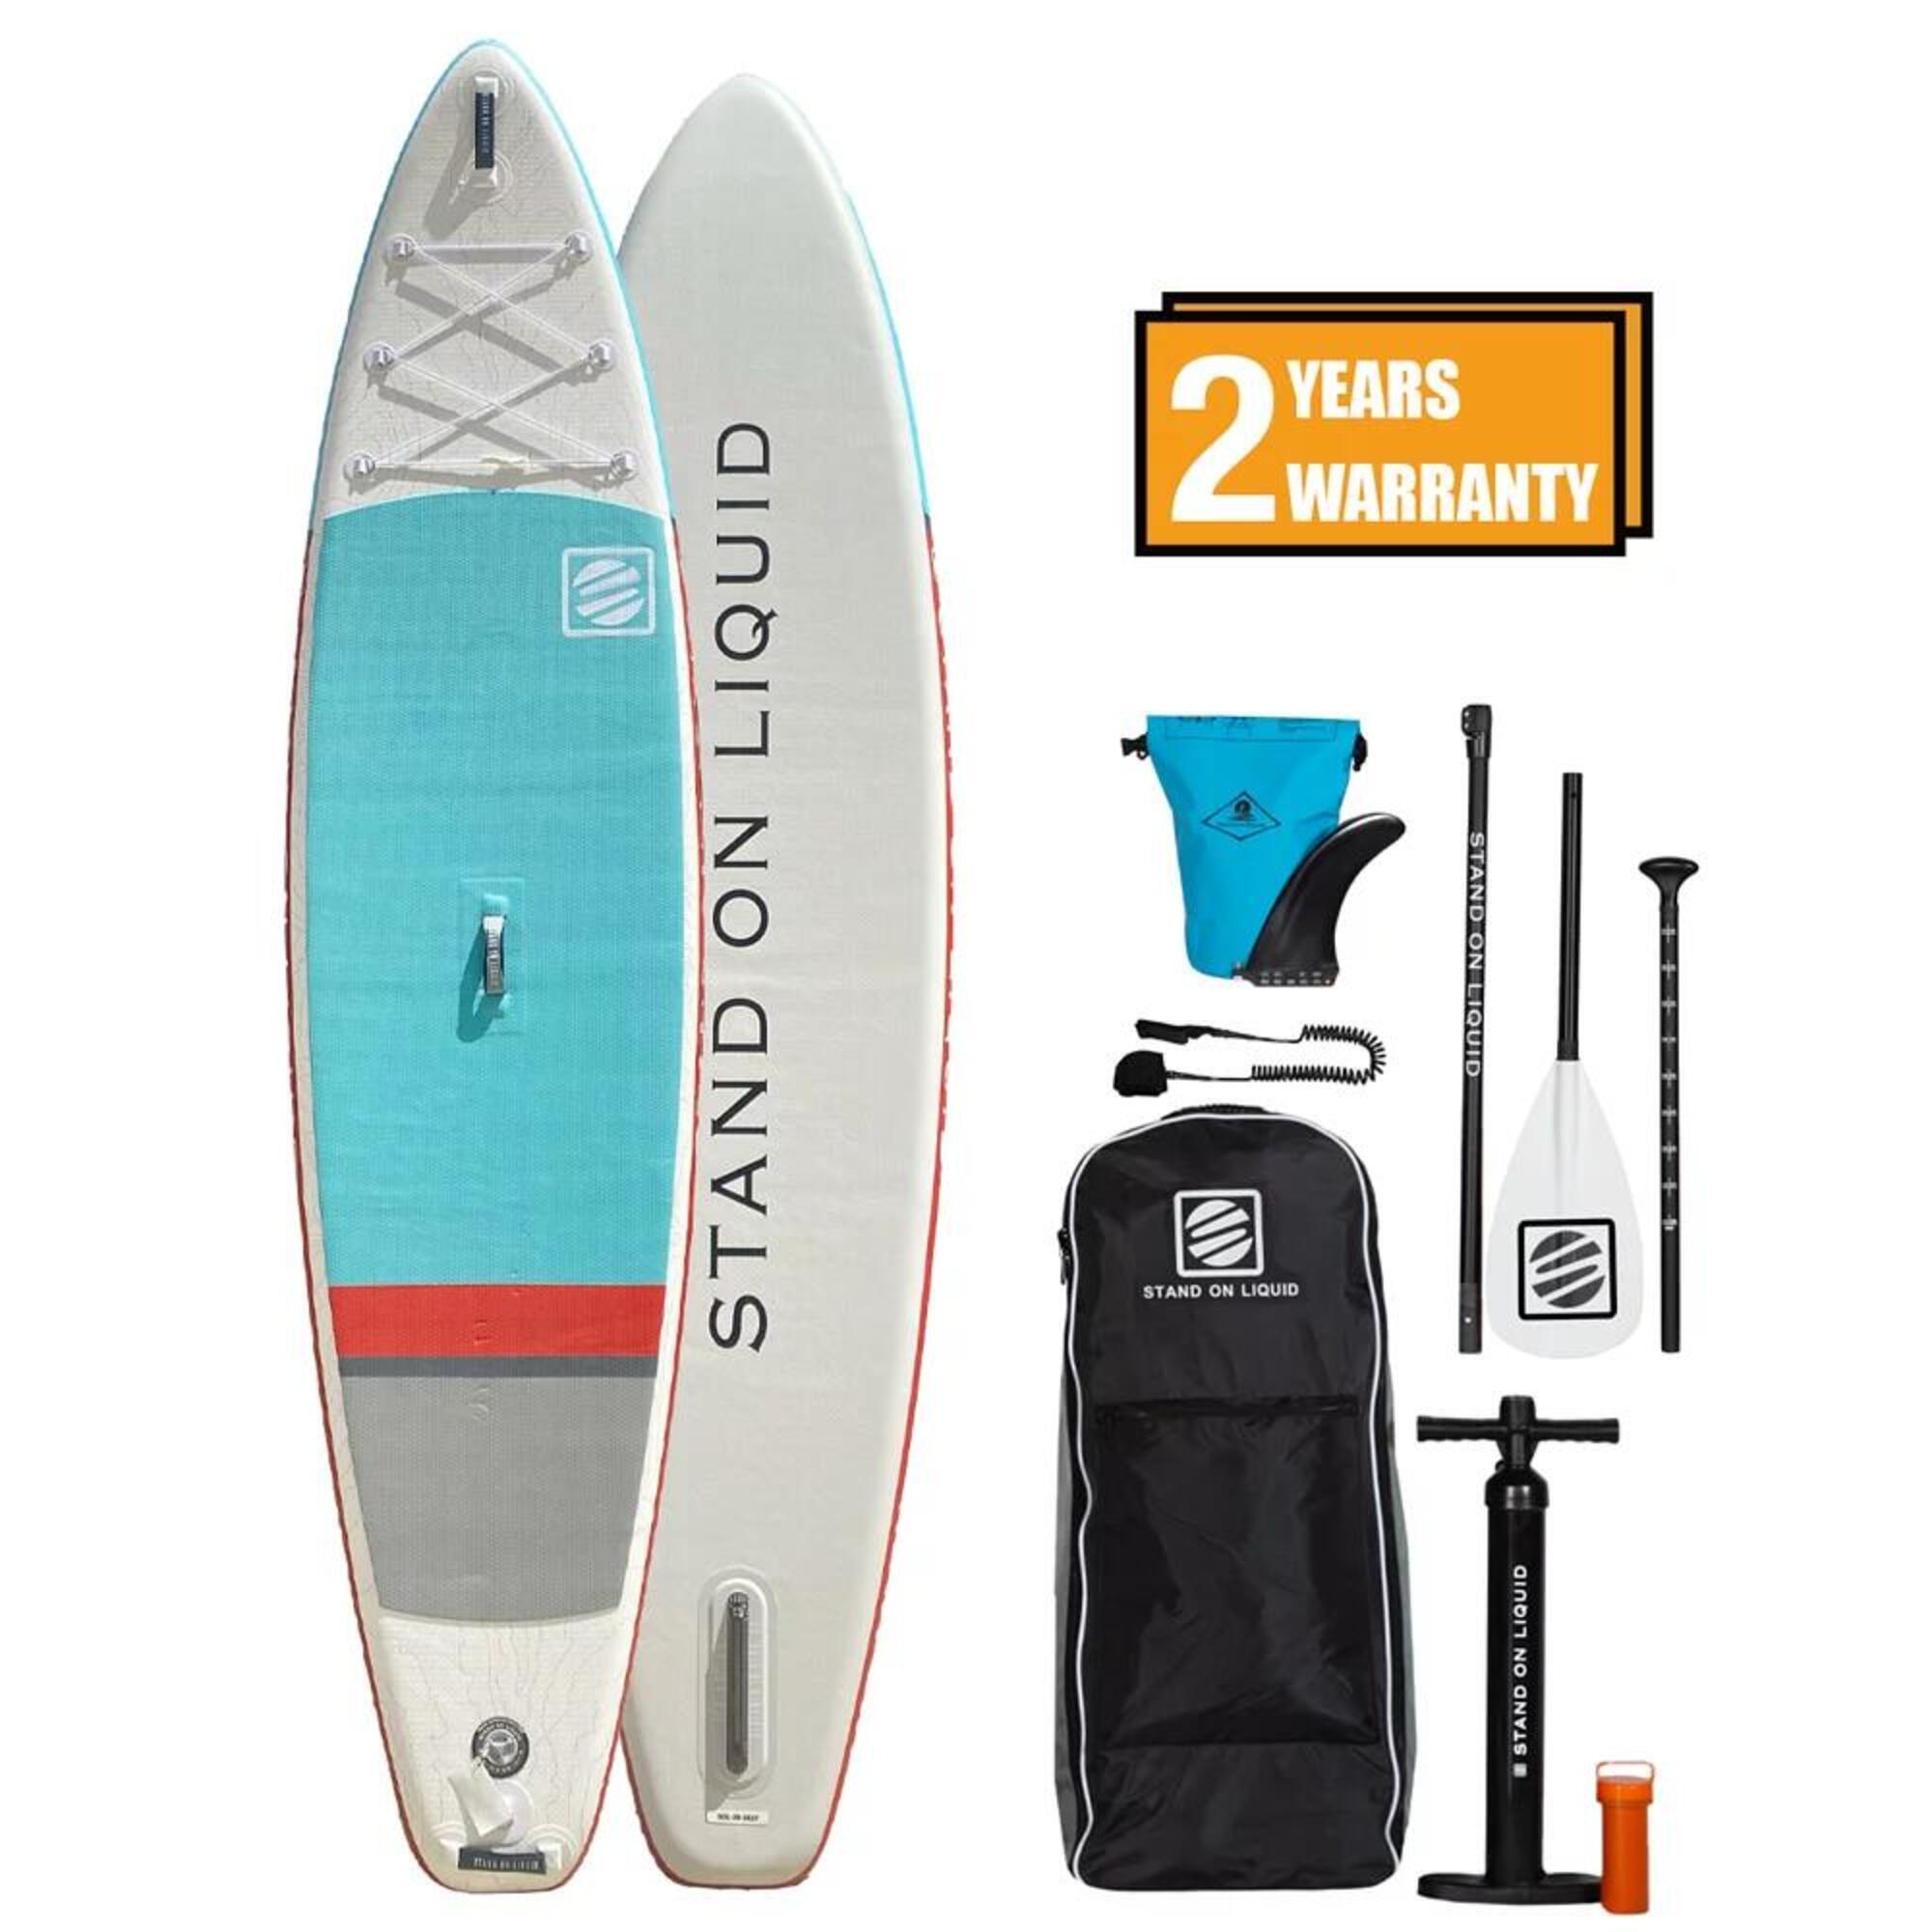 Newport Air 11’6” Inflatable SUP Paddle Board Package